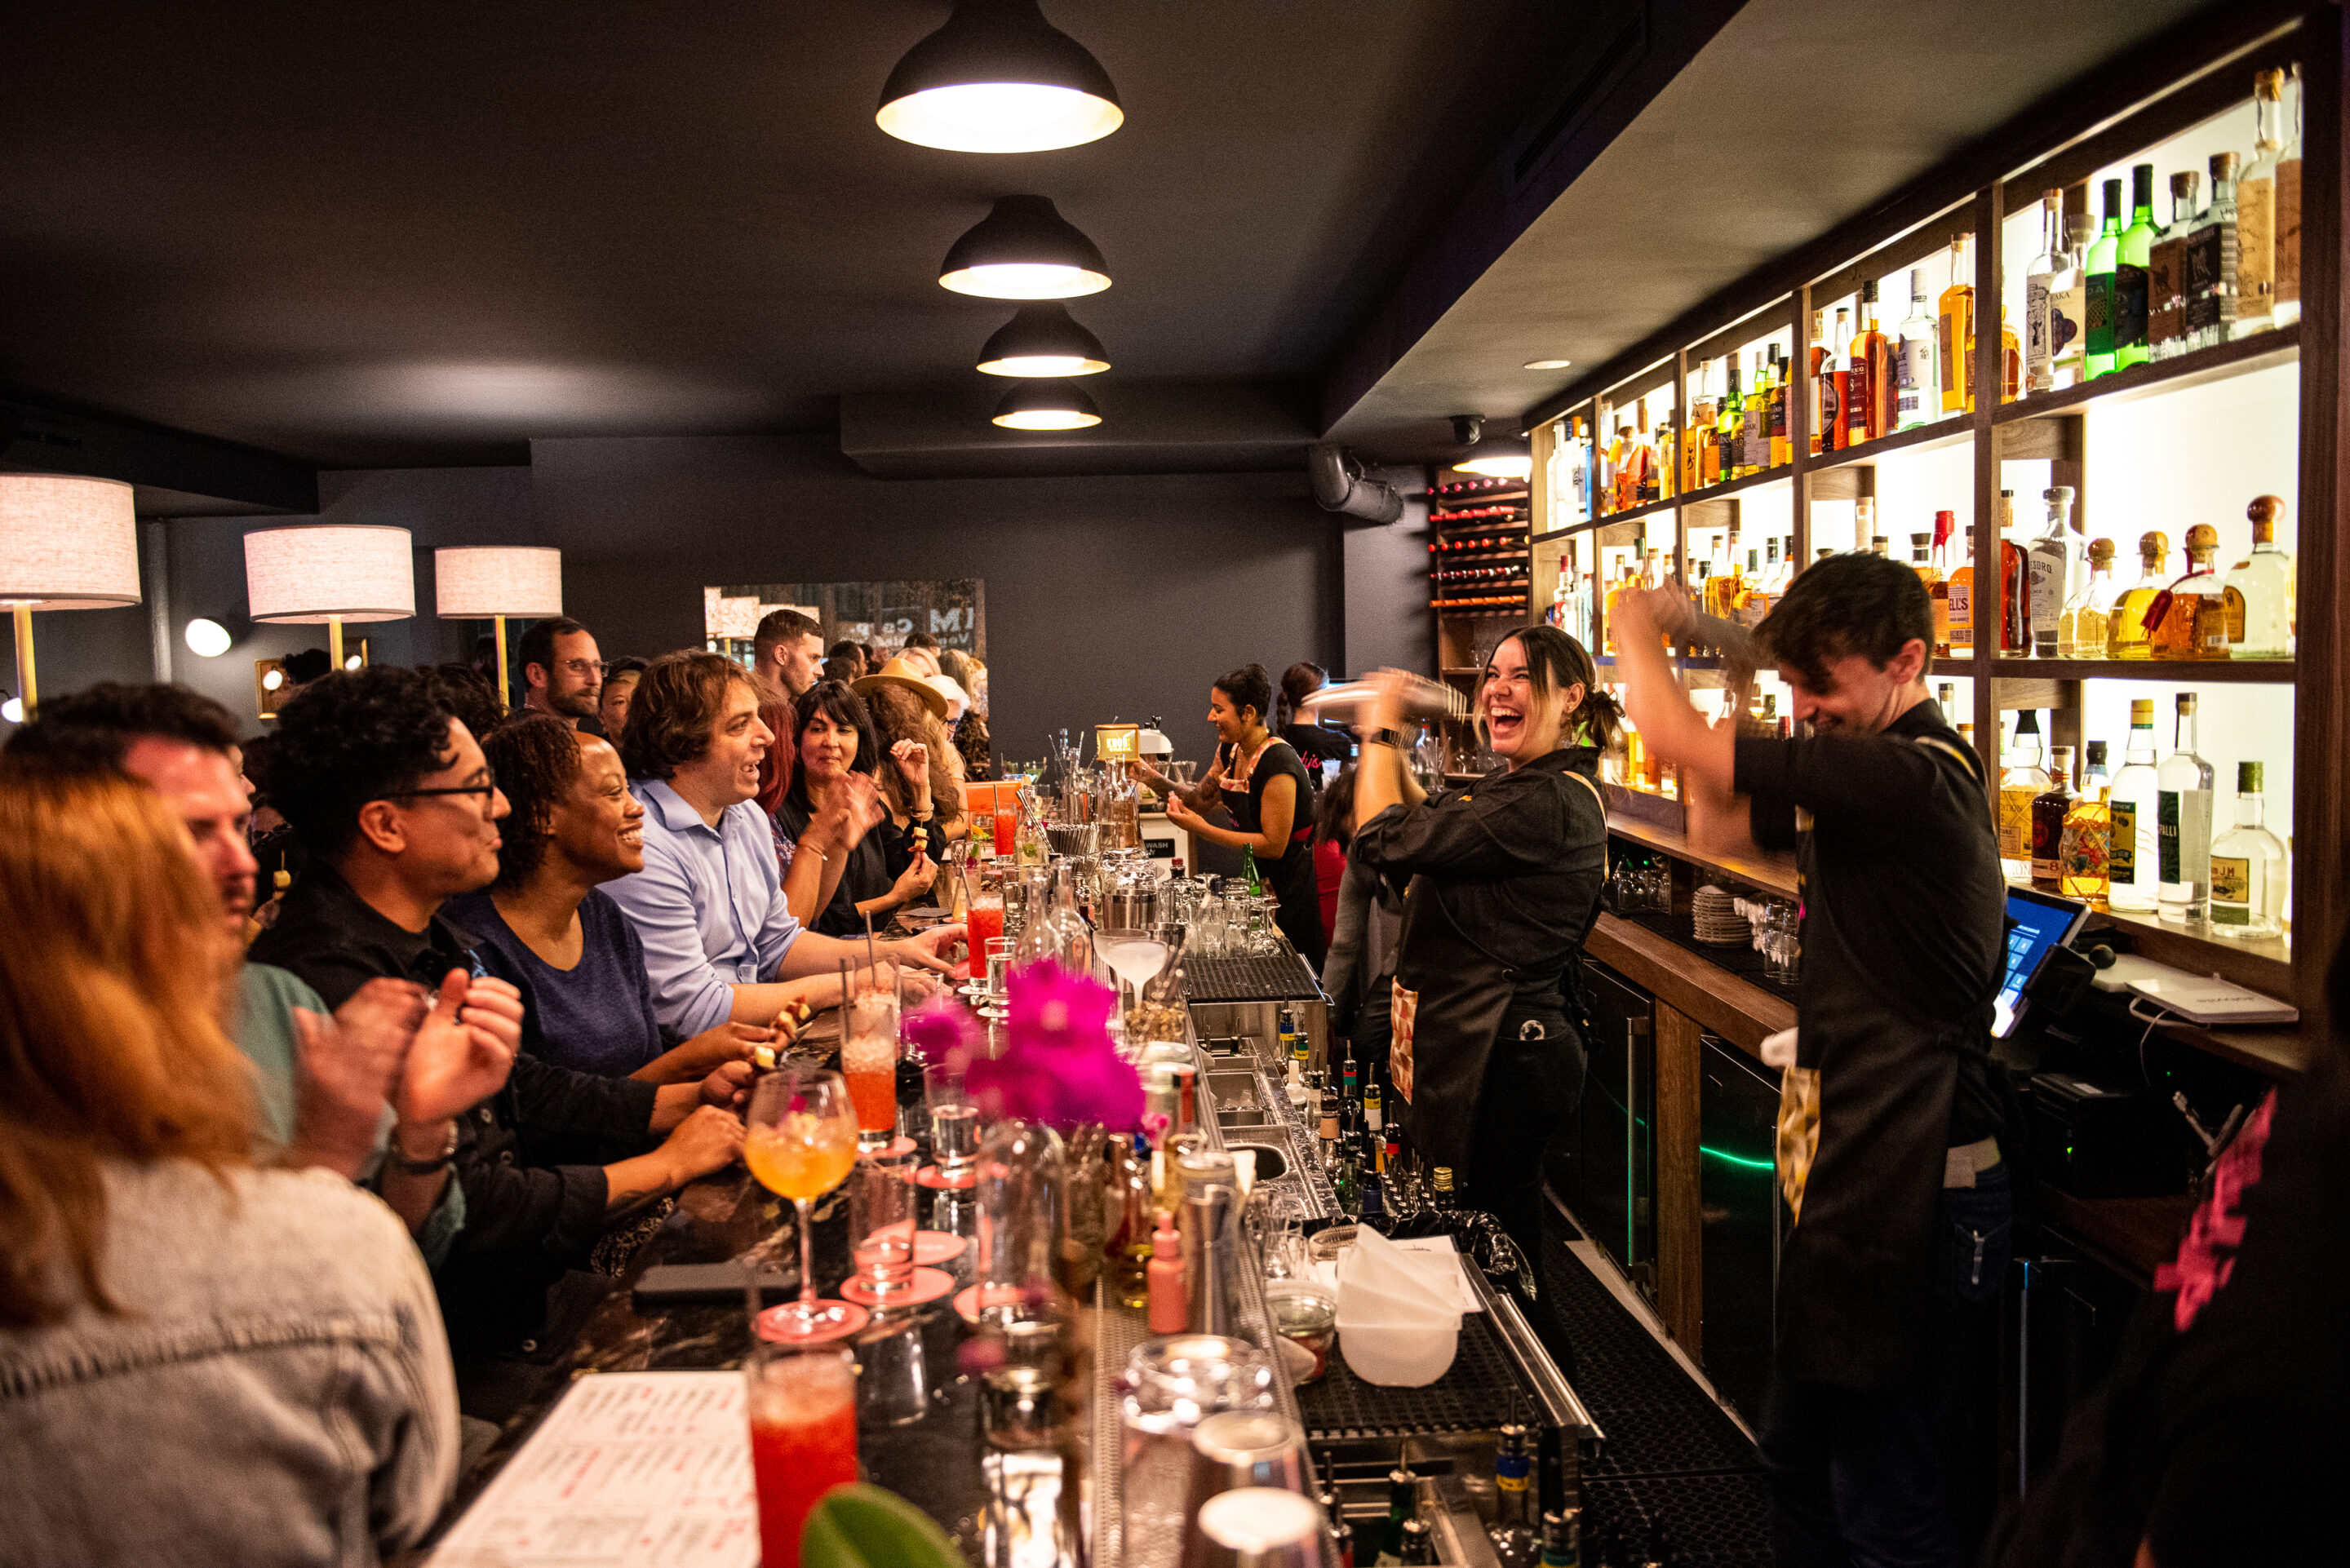 From Behind the Bar: Tito Pin Perez of Rayo